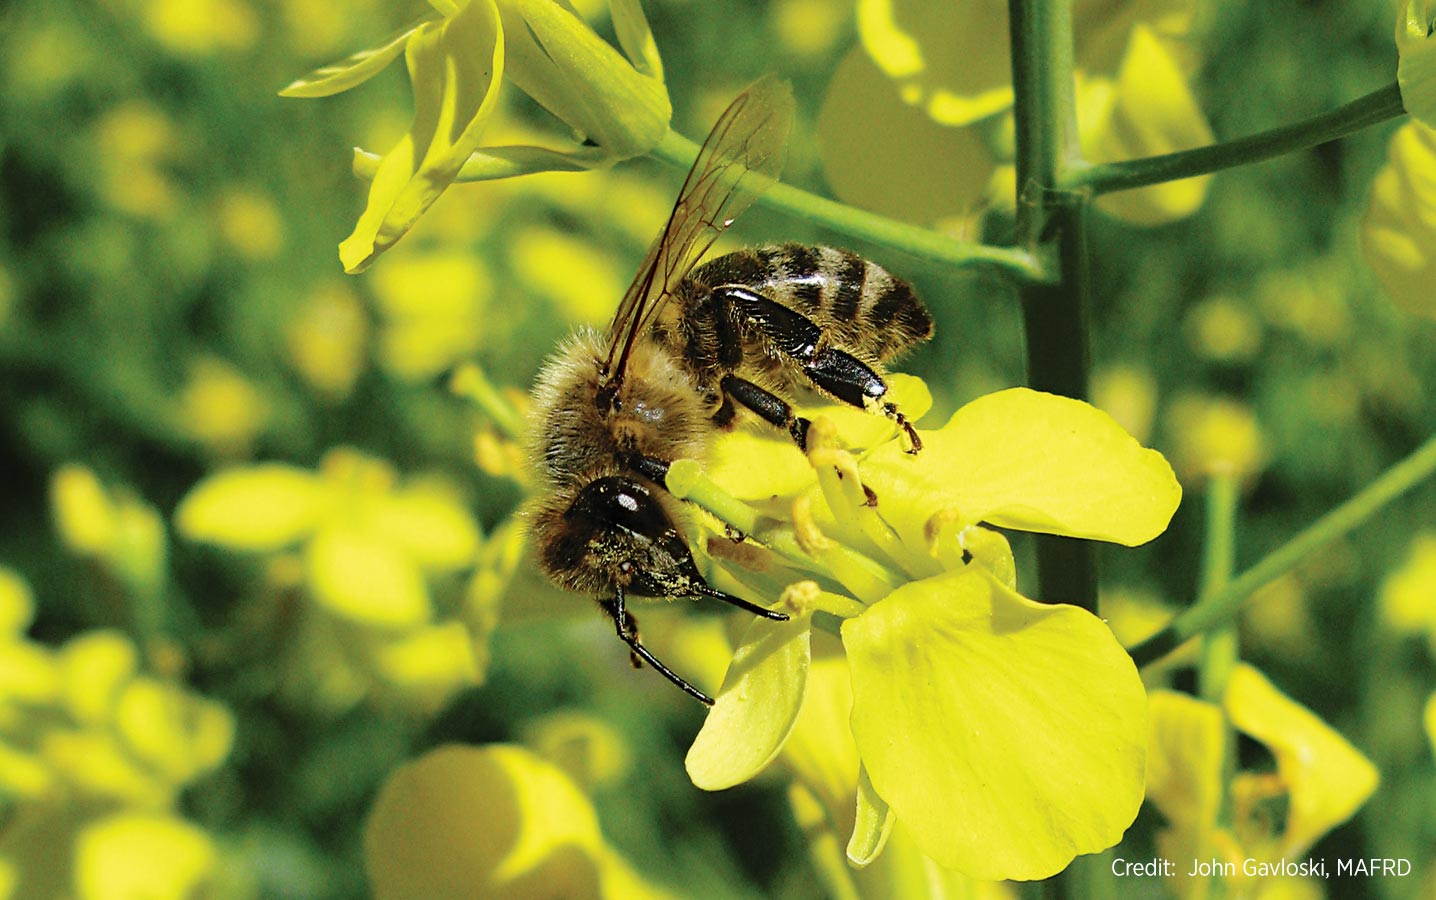 Bees and other pollinators are most active when the crop is flowering. Avoid spraying insecticide on flowering canola. If this is unavoidable, apply products to flowering canola after 8:00 p.m. until dusk, or into night, when bees aren’t actively foraging. Follow thresholds when making spray decisions. For more information, go to www.canolawatch.org and search for the article “Bee BMPs.”